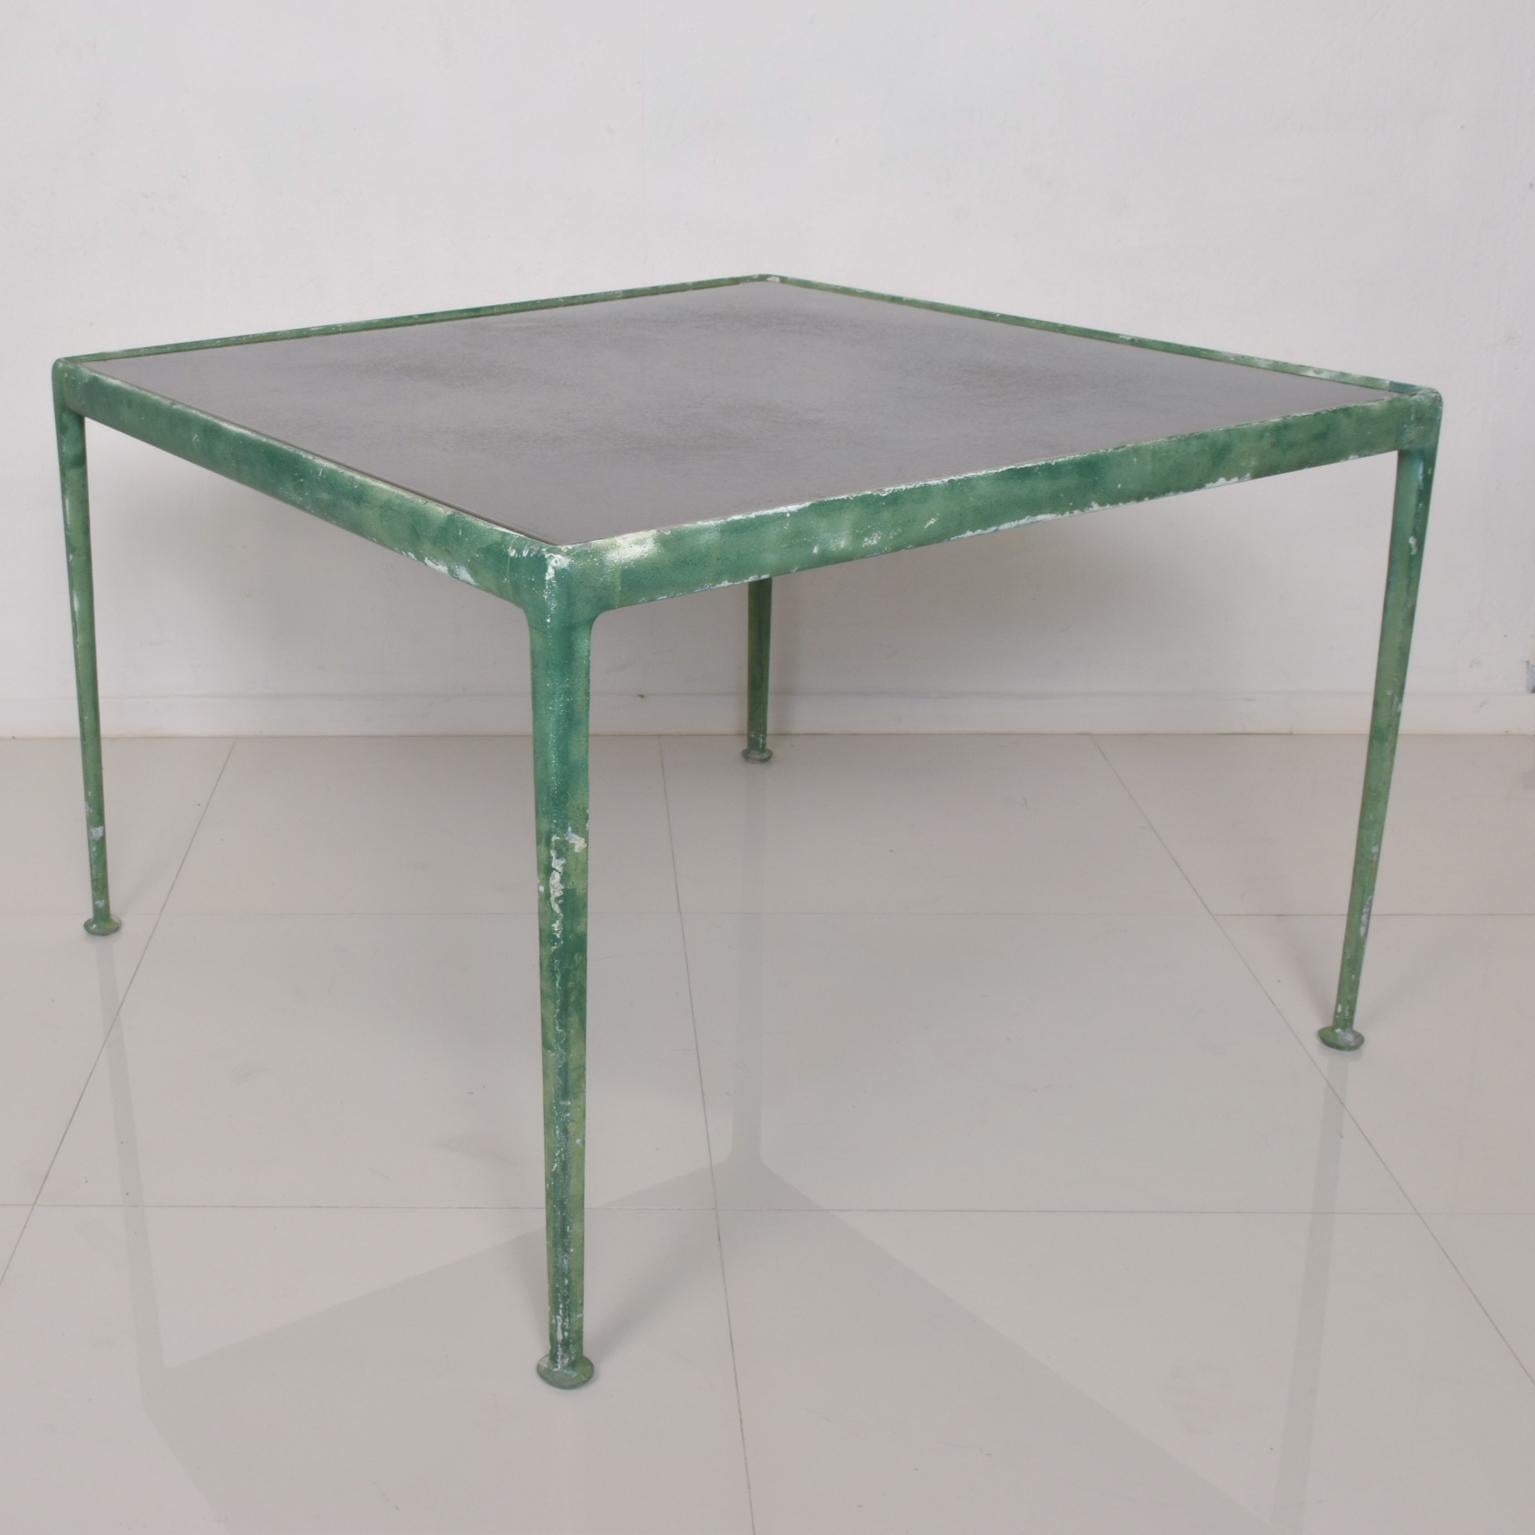 Aluminum MCM Vintage Patio Dining Table by Richard Schultz for Knoll, 1966